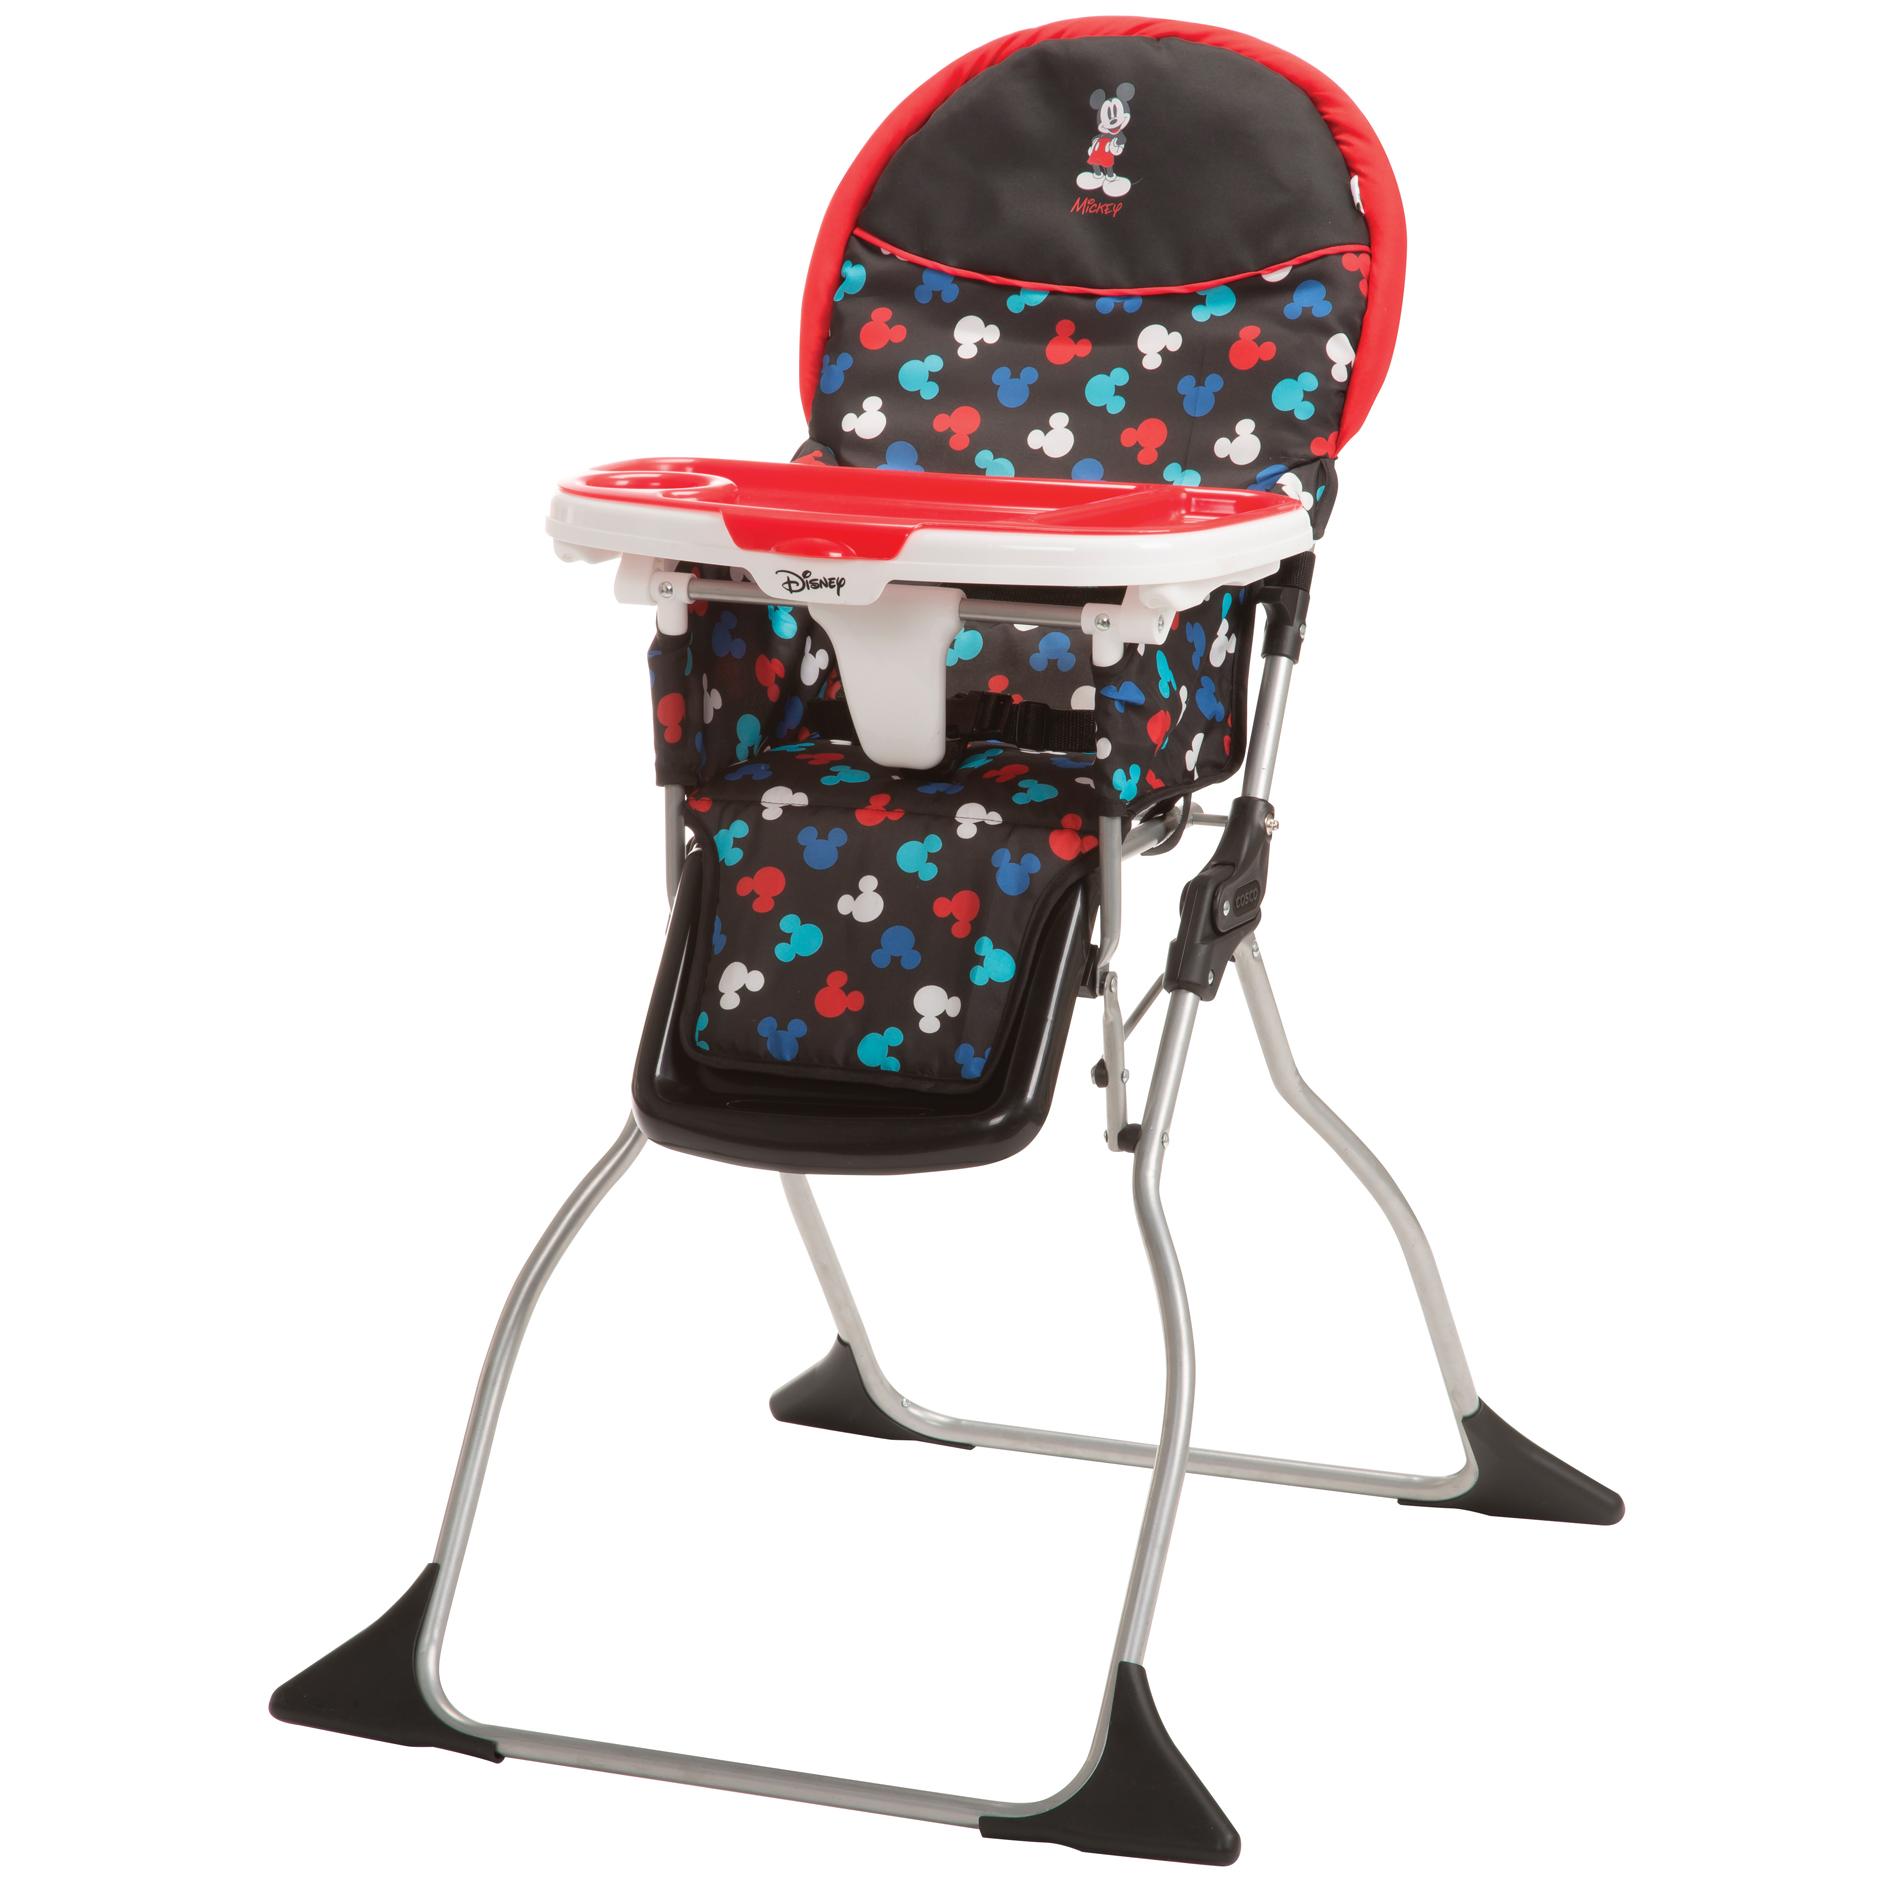 Disney Mickey Mouse Simple Fold Plus High Chair